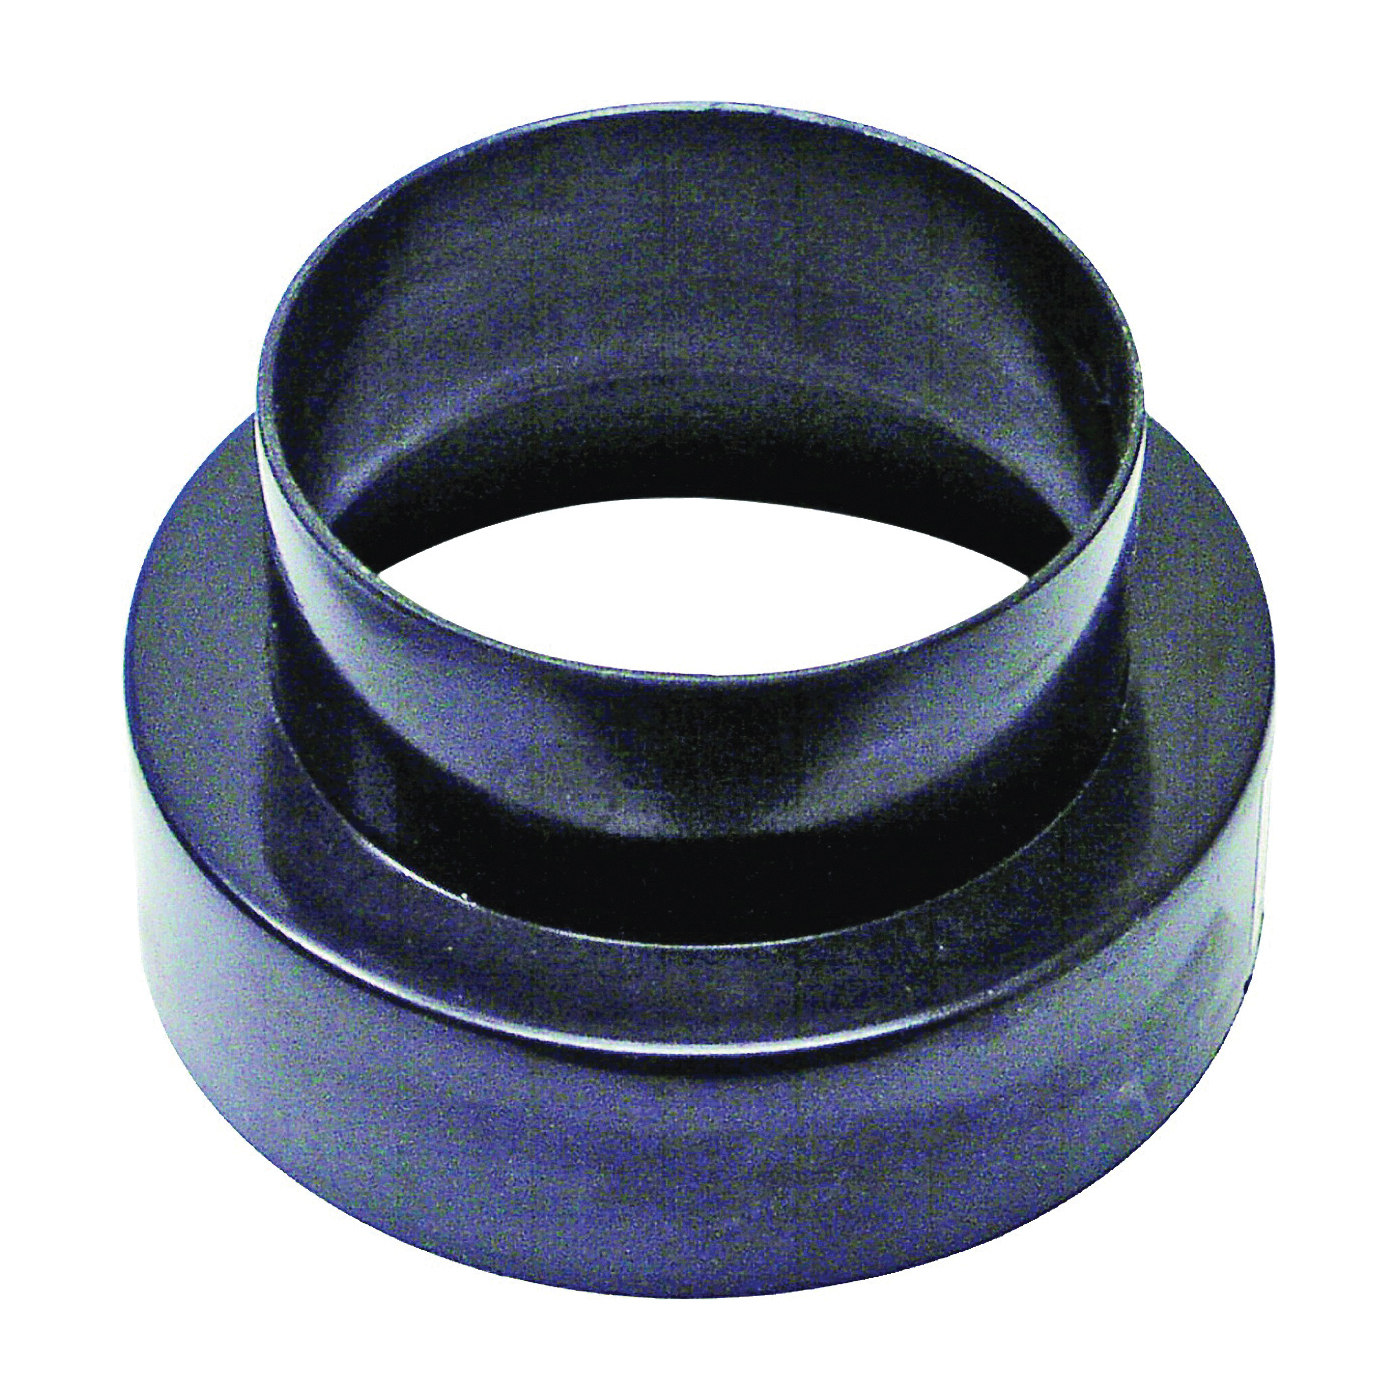 Lambro 235 Vent Adapter Female (Large End), Female (Large End), Male (Small End), Plastic, Black - 1